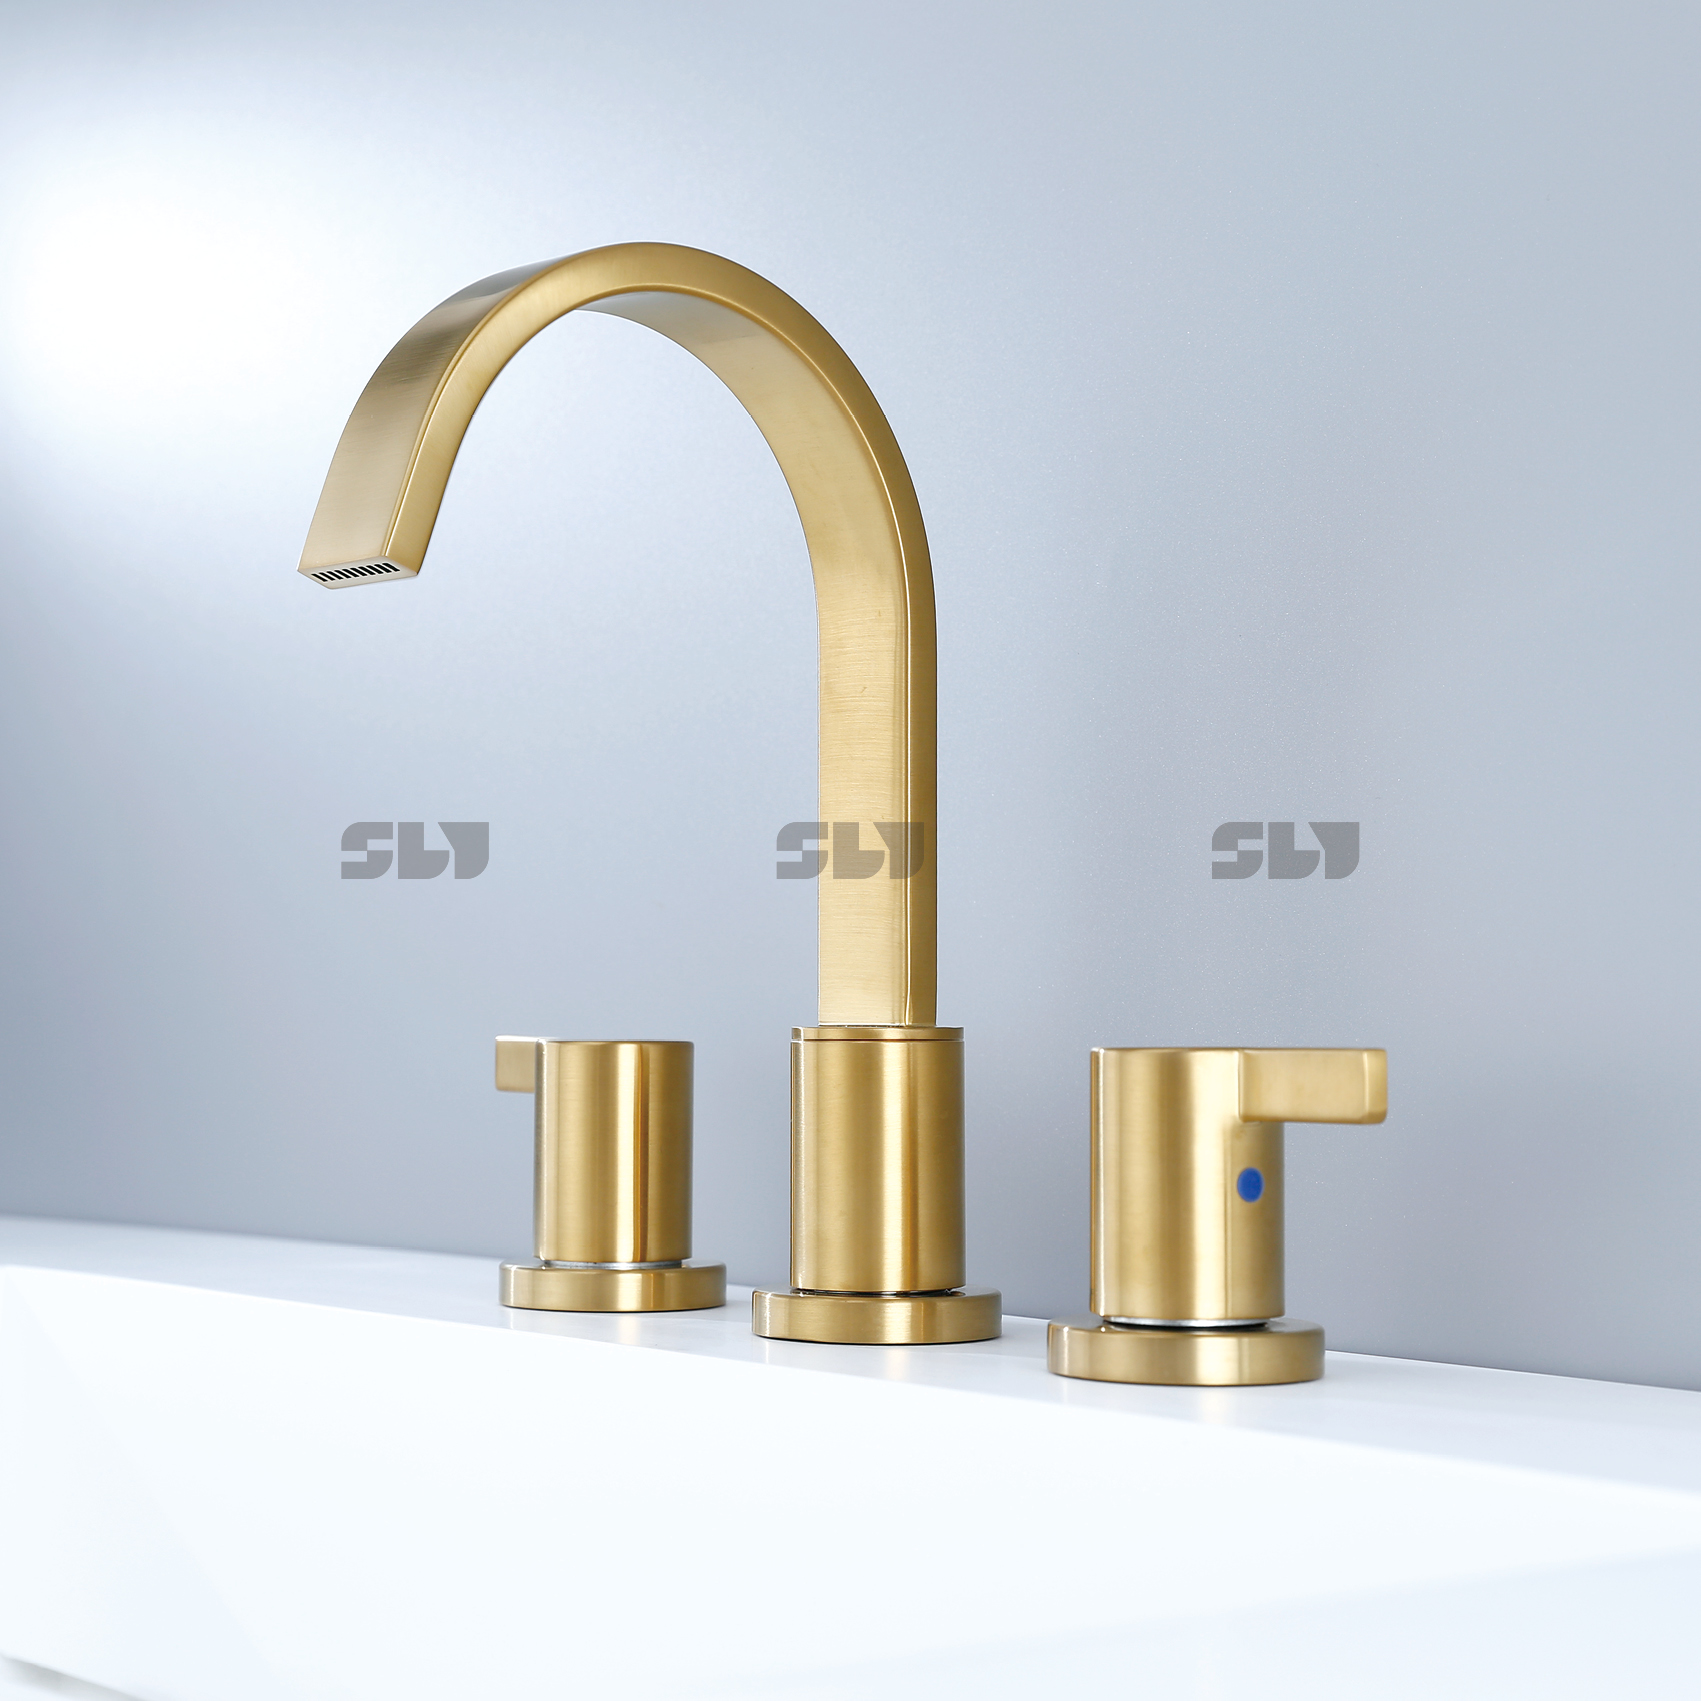 SLY Wholesale Luxury Gold Basin Faucets for Use in Home Bathrooms